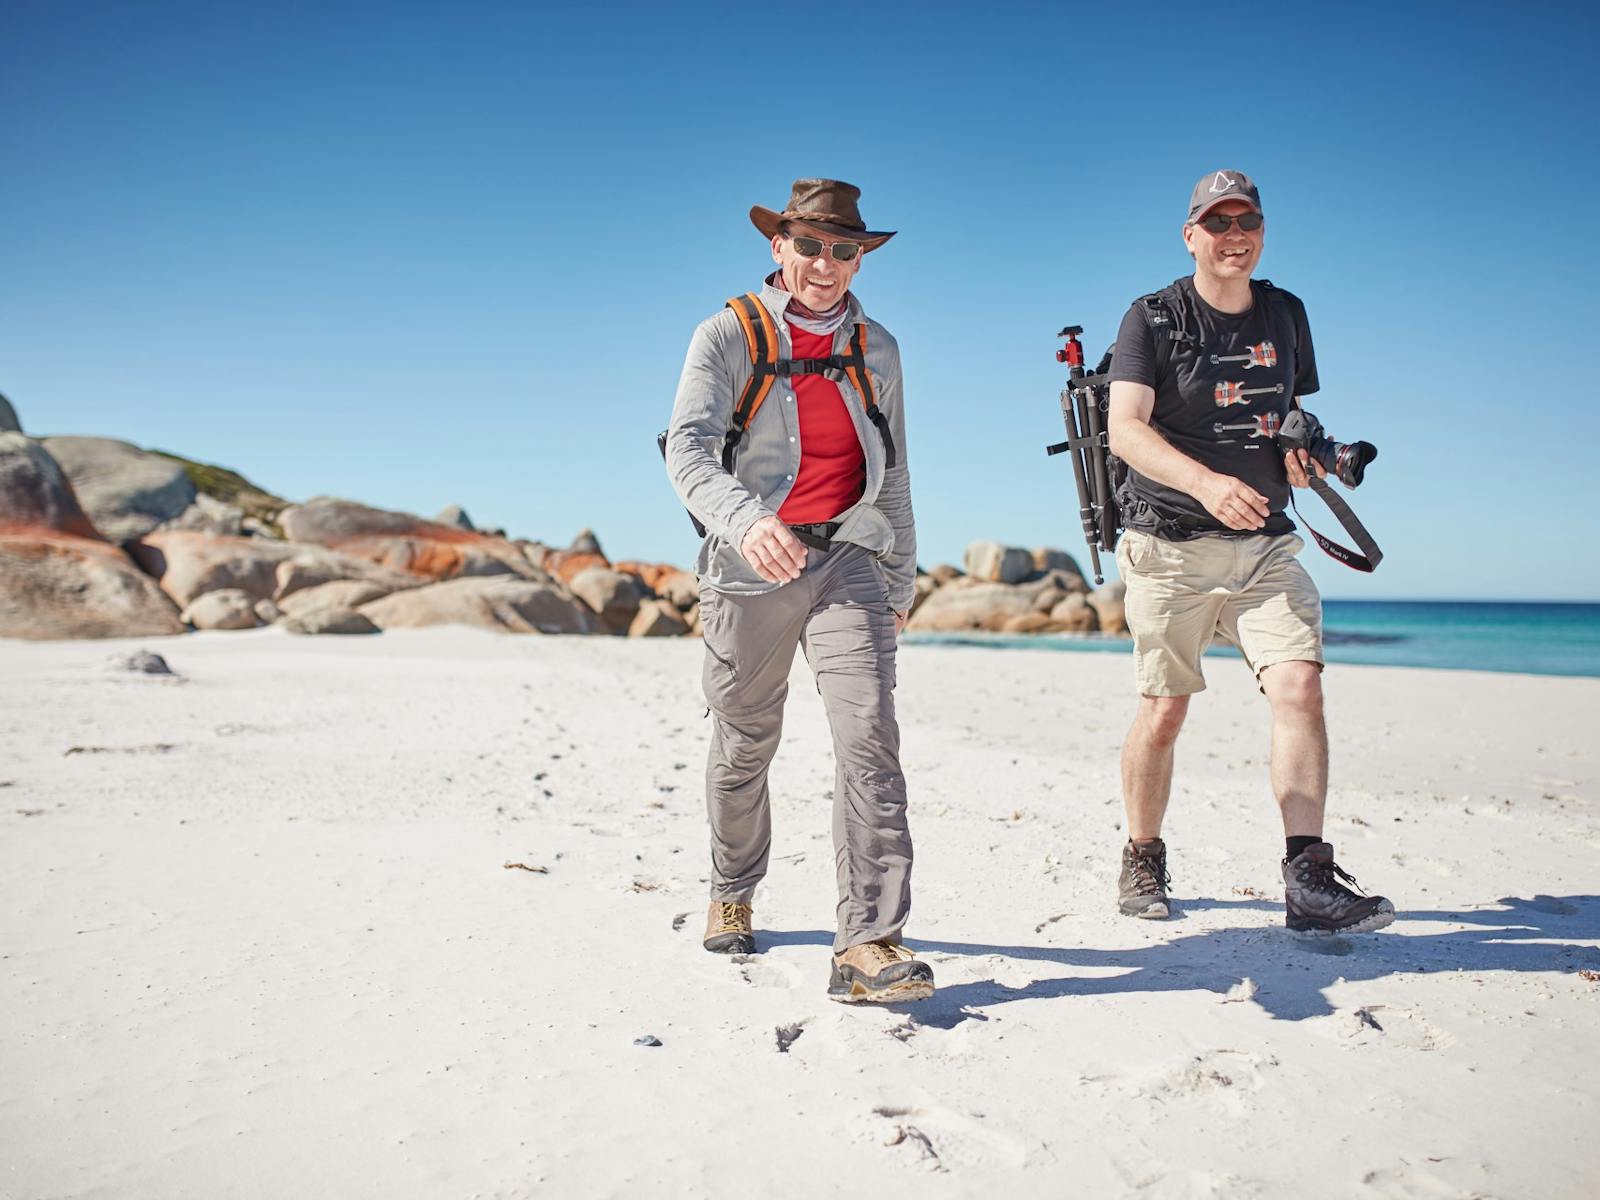 Tour Guide and Guest Beach Walking Smiles Park Trek Walking Holidays Bay of Fires Hiking Tour